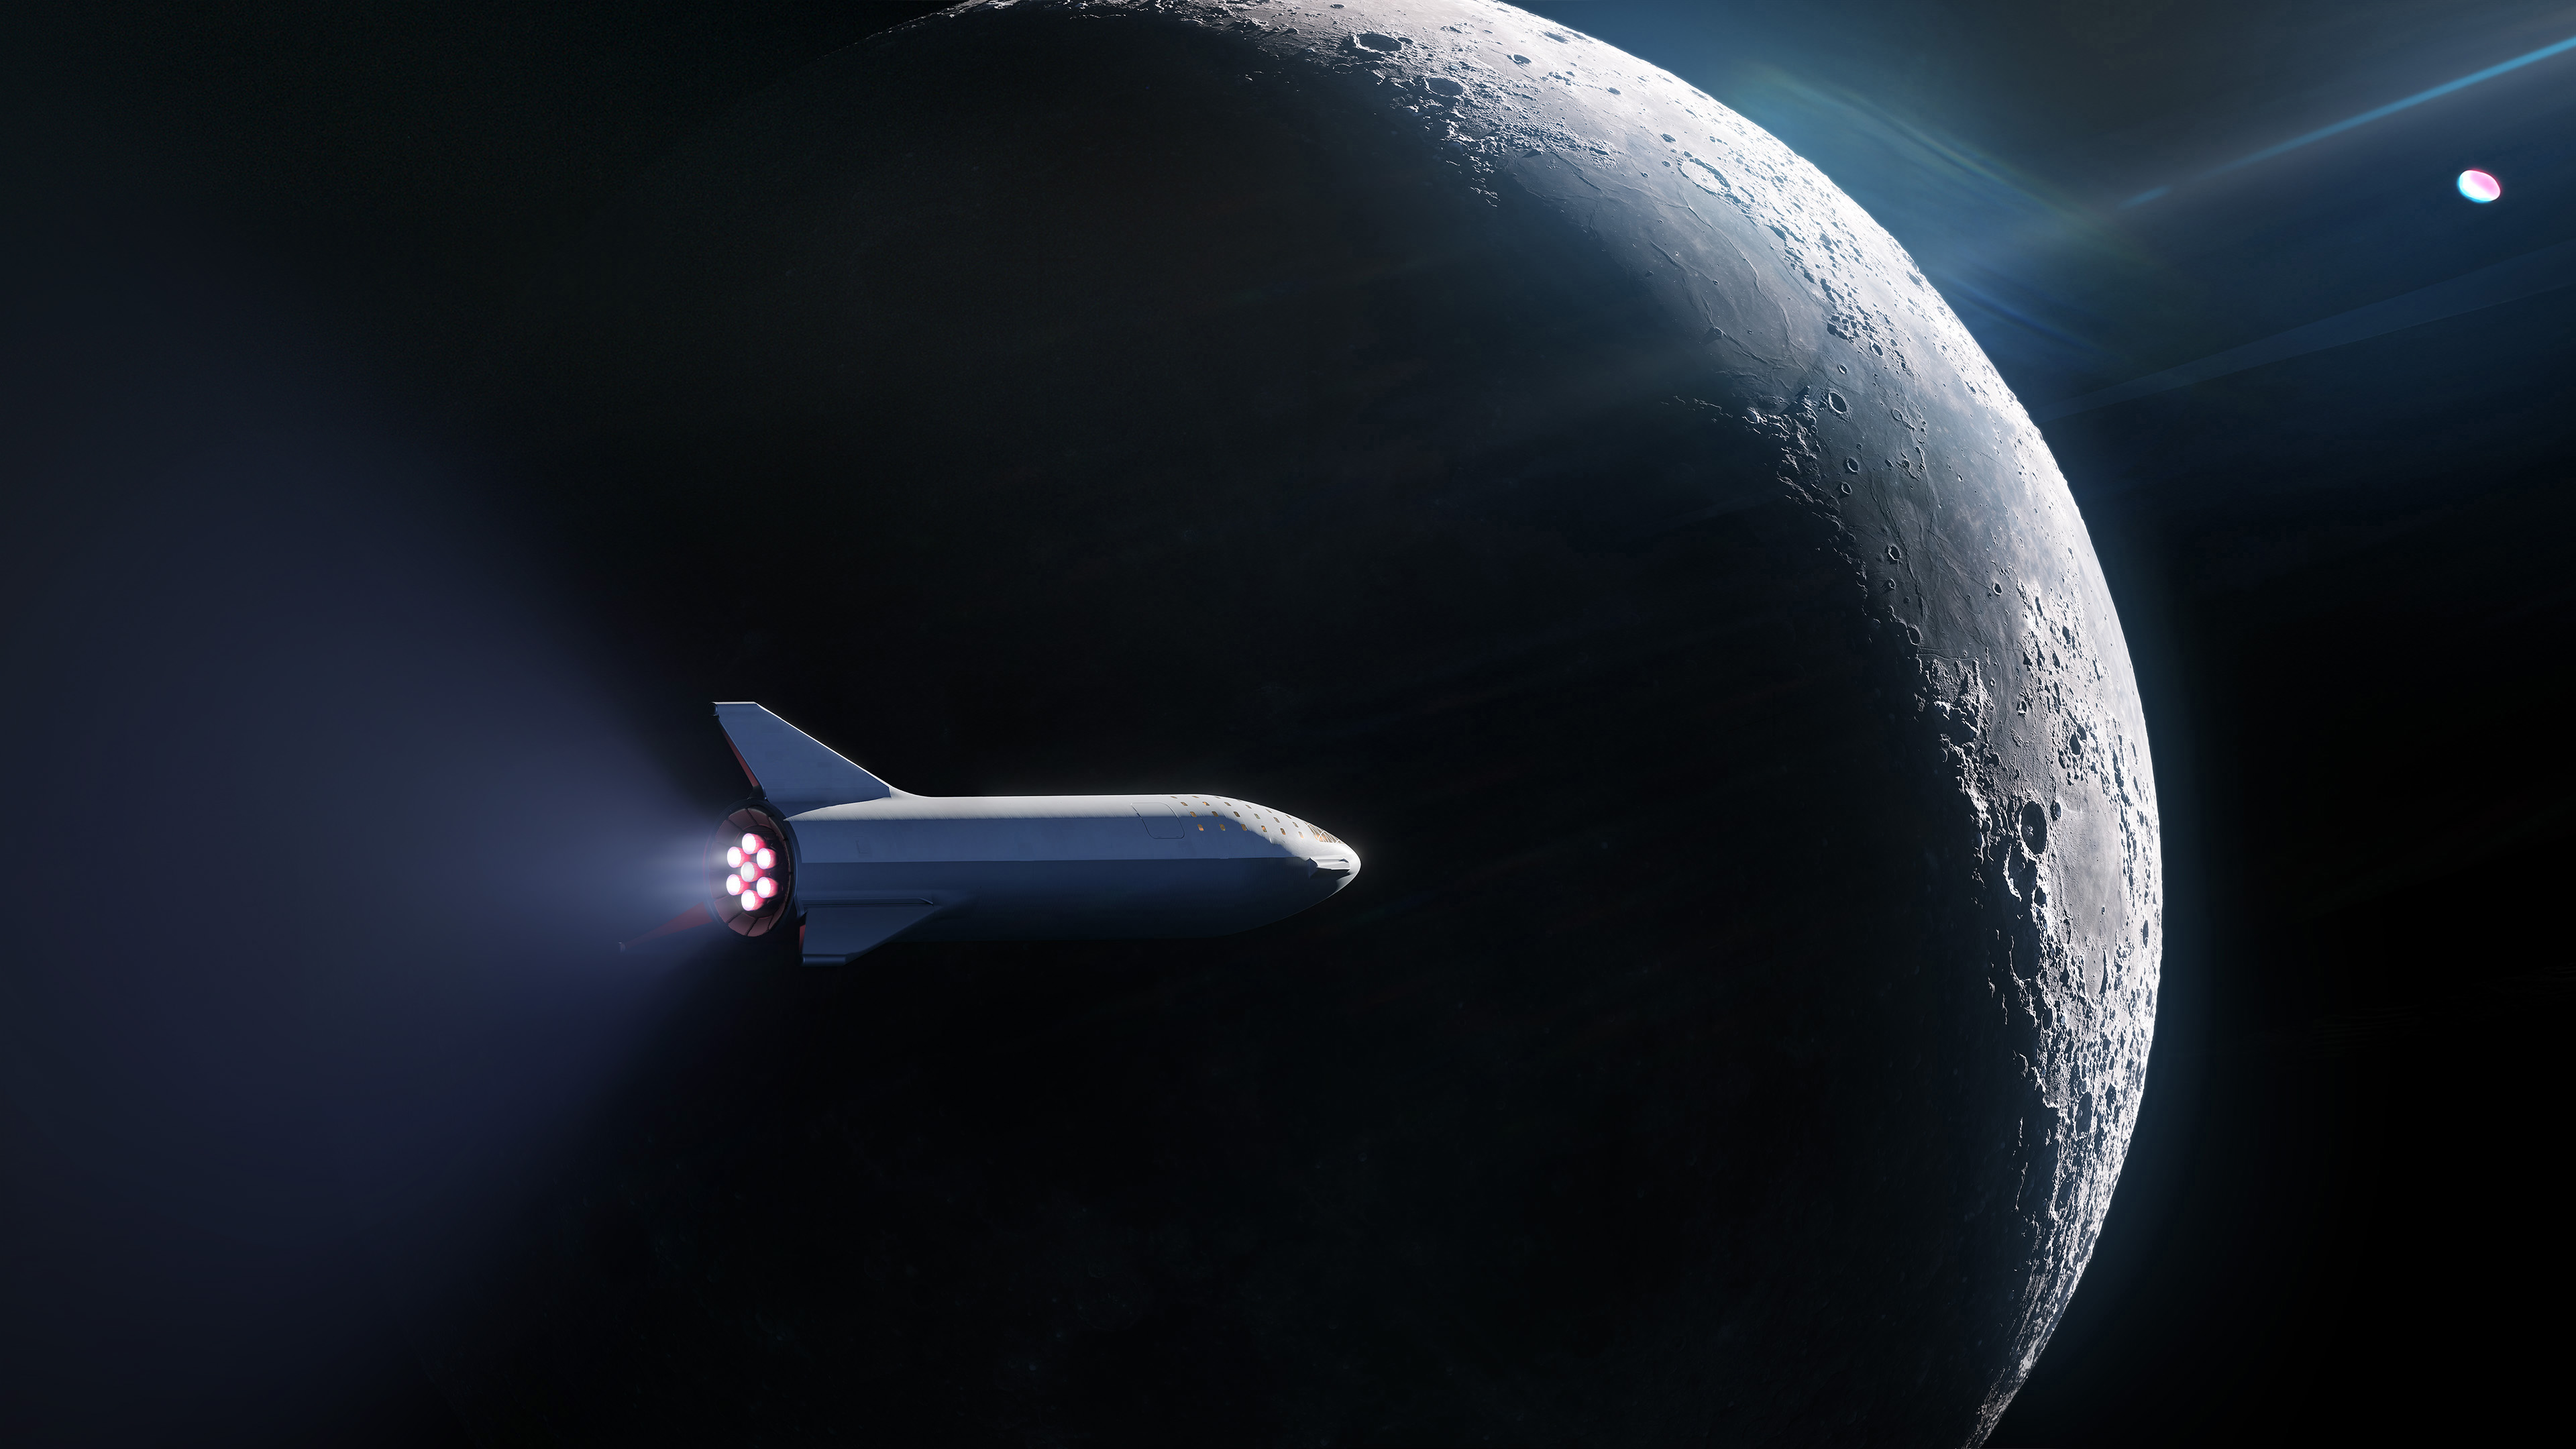 Wallpapers others Space X lunar bfr mission on the desktop